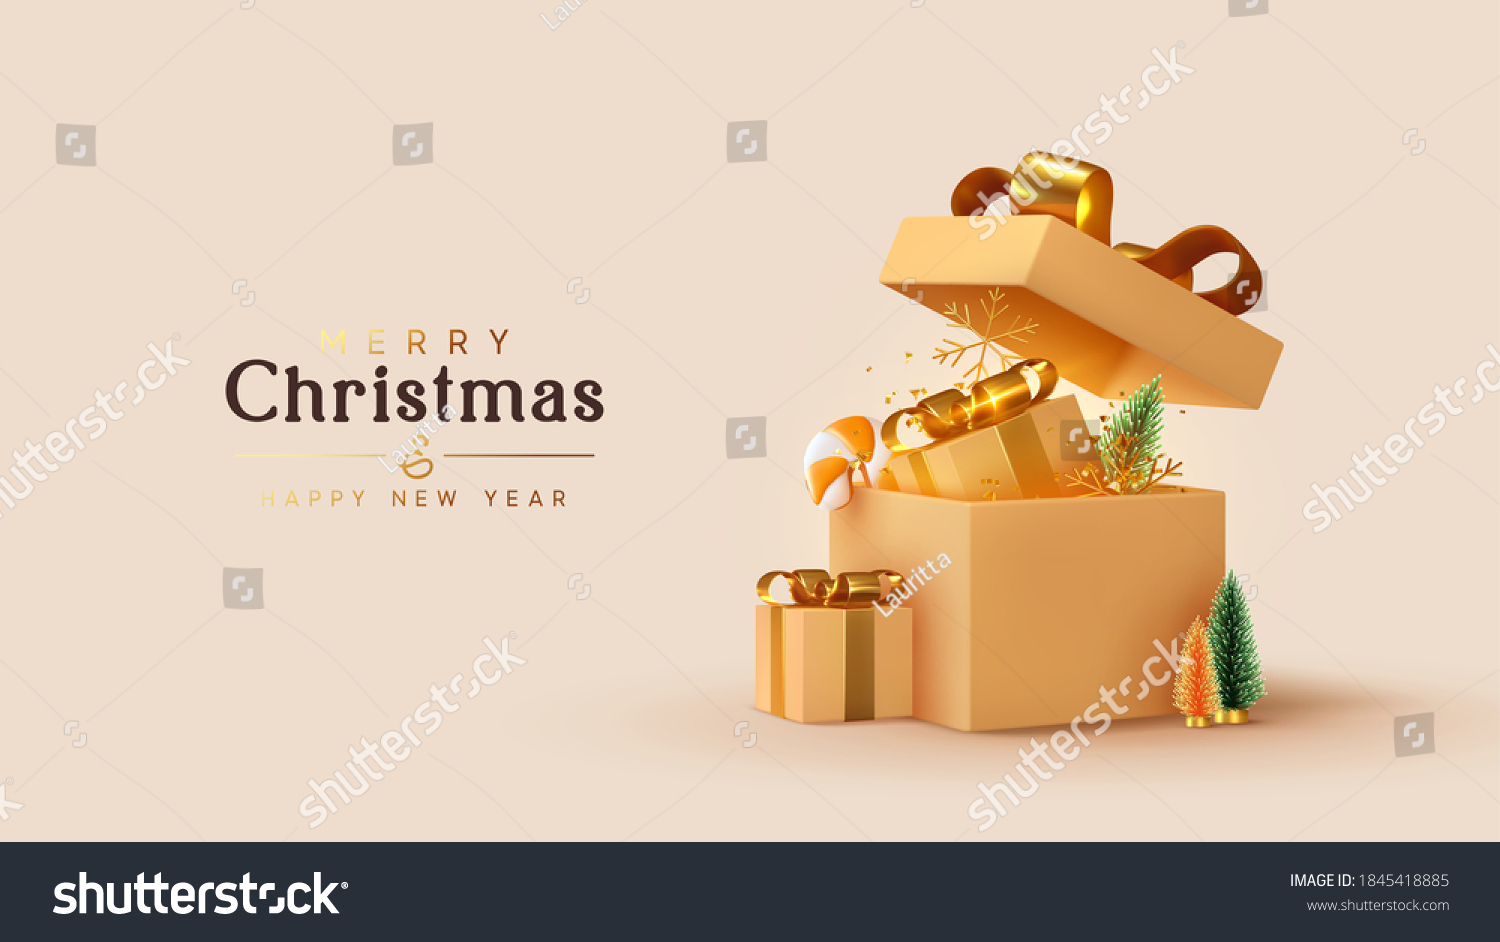 Realistic beige gifts boxes. Open gift box full of decorative festive object. New Year and Christmas design. Holiday banner, web poster, flyer, stylish brochure, greeting card, cover. Xmas background #1845418885